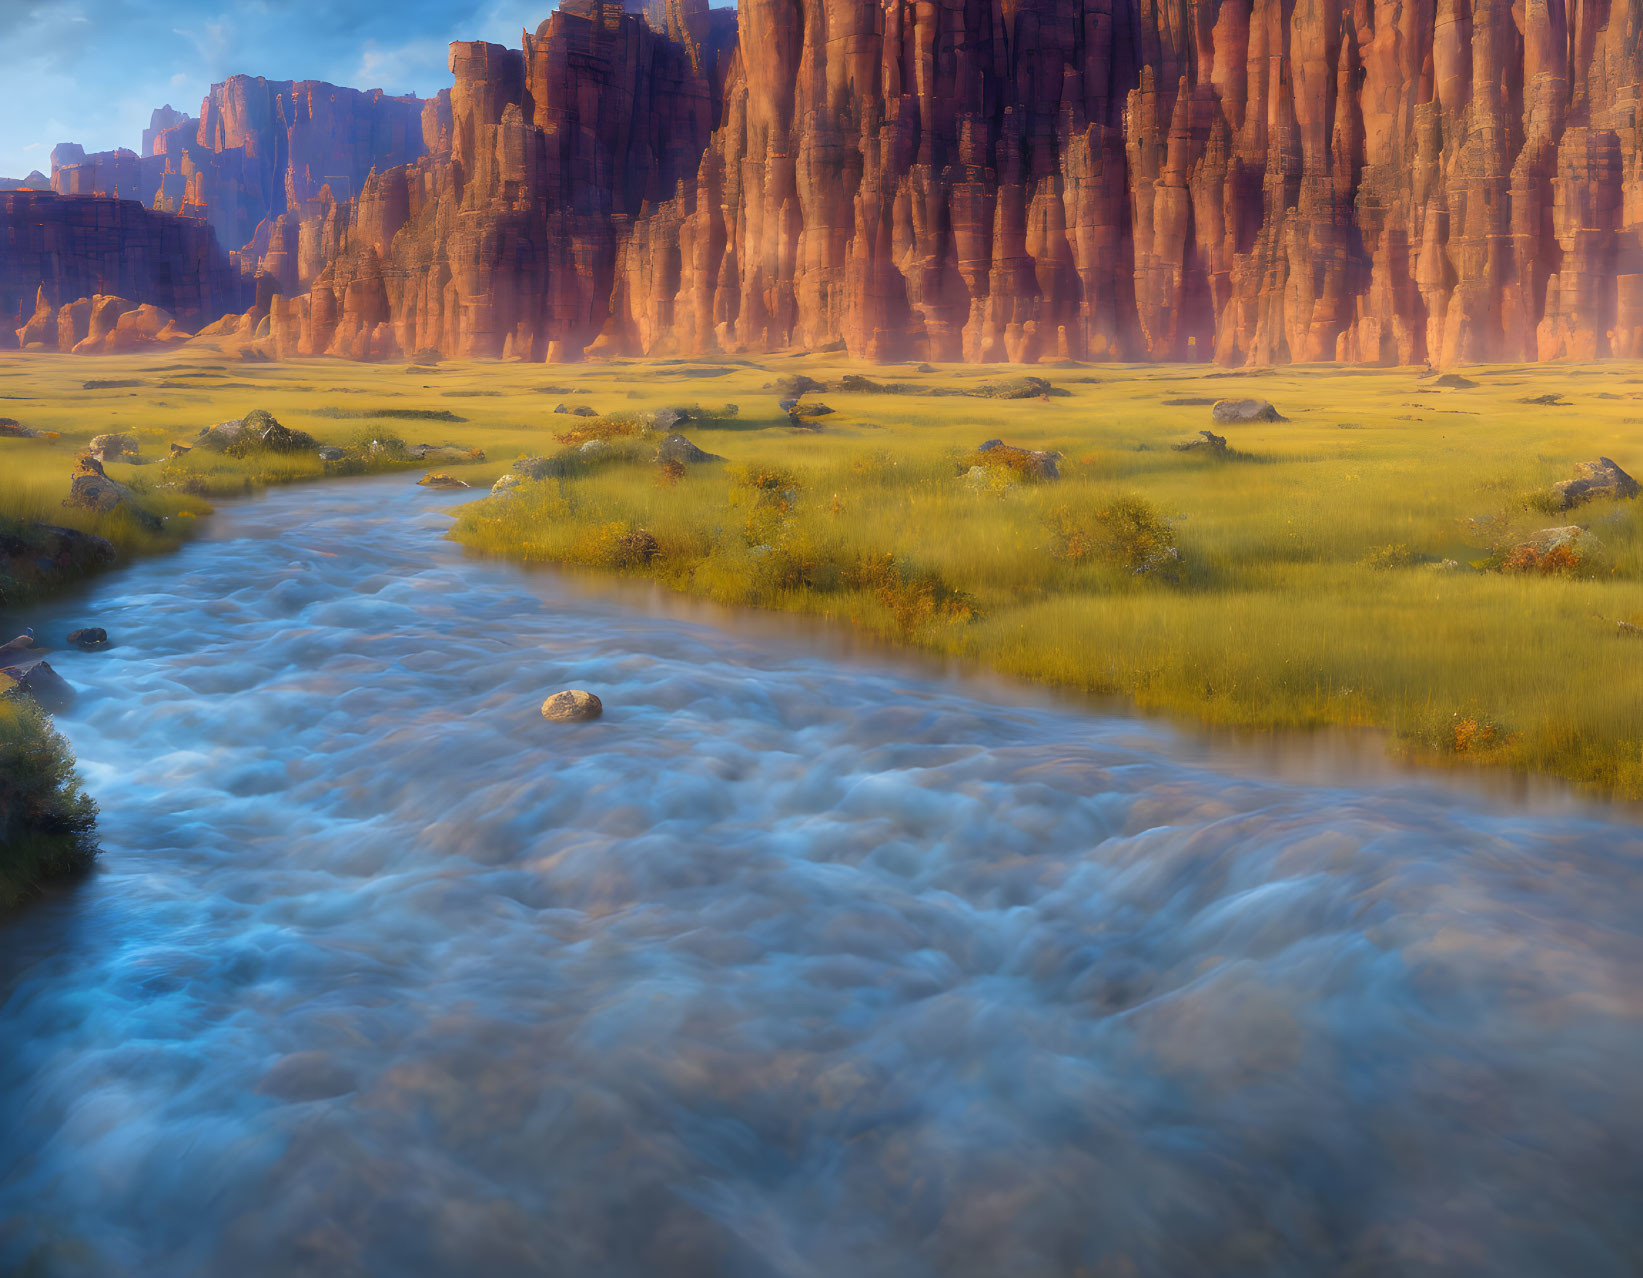 Tranquil river in grassy plain with red rock cliffs under sunlight